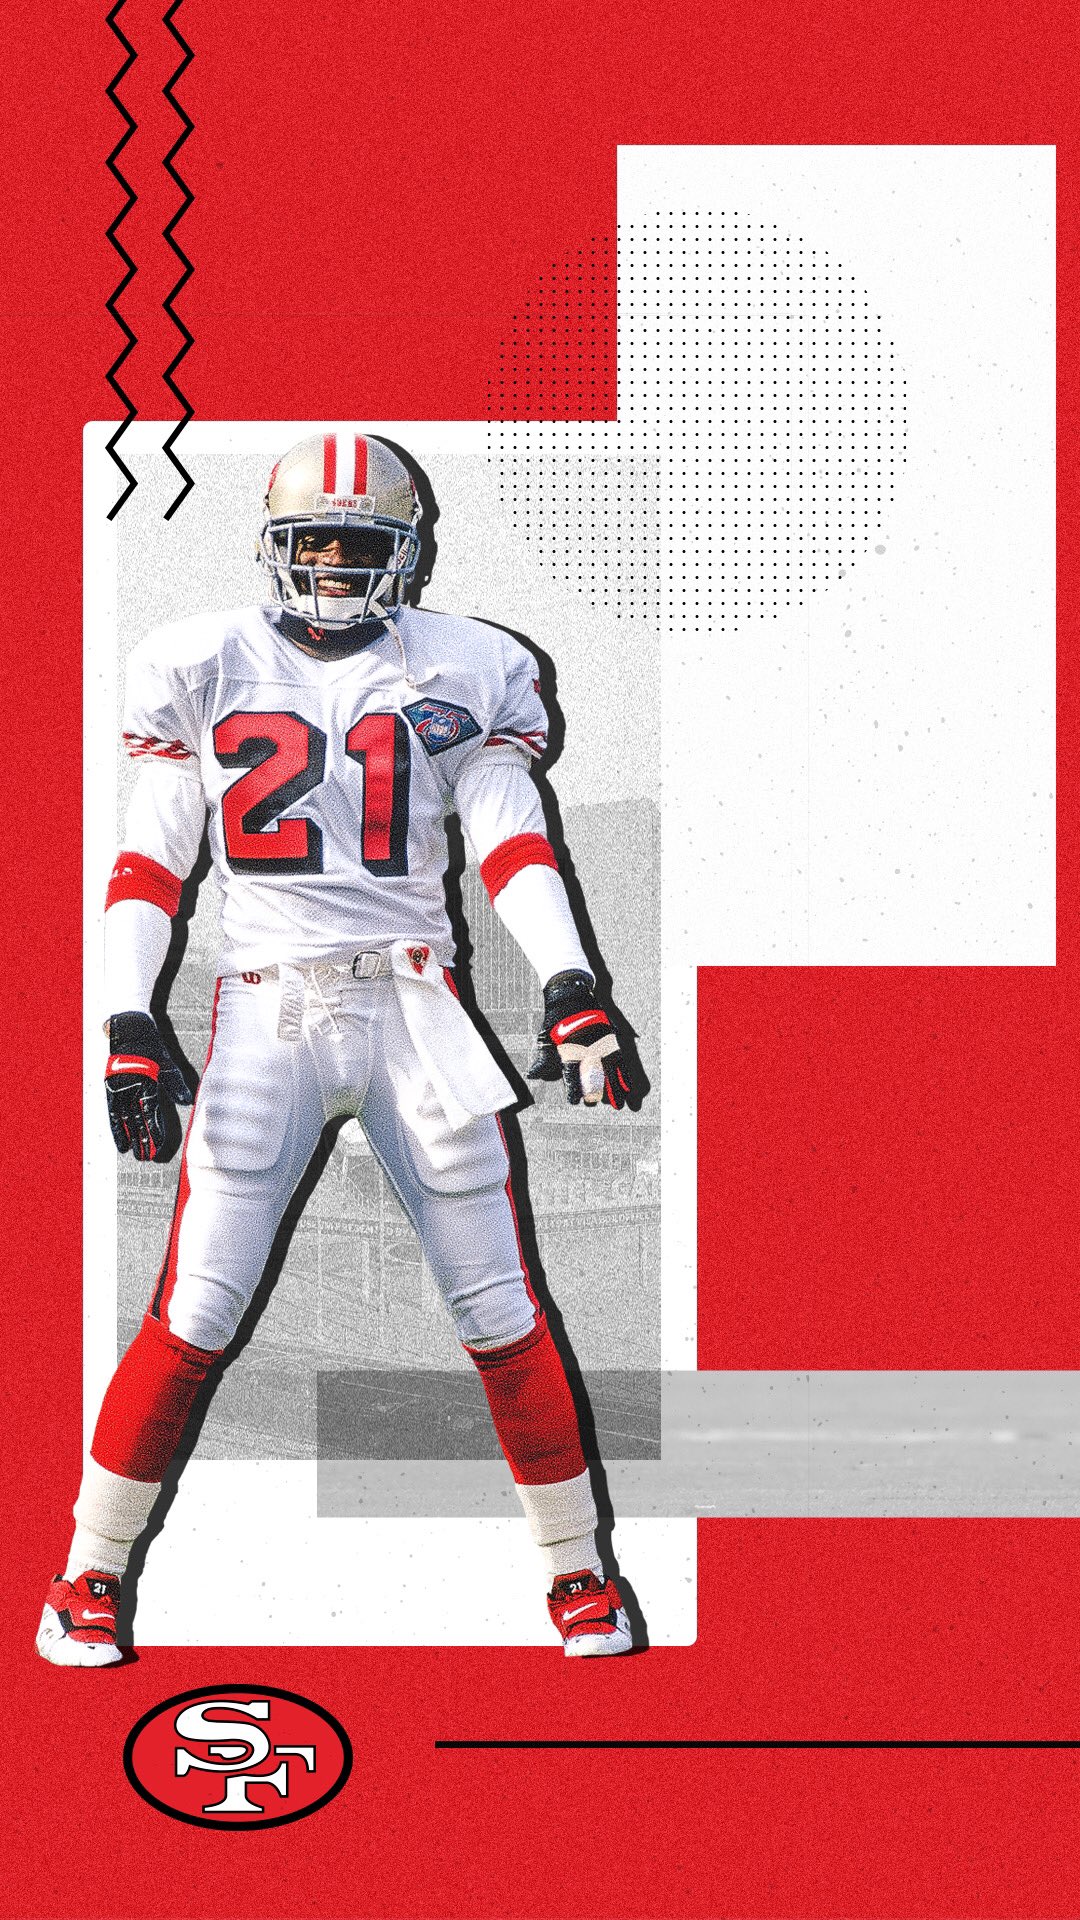 49ers throwback jersey 2019